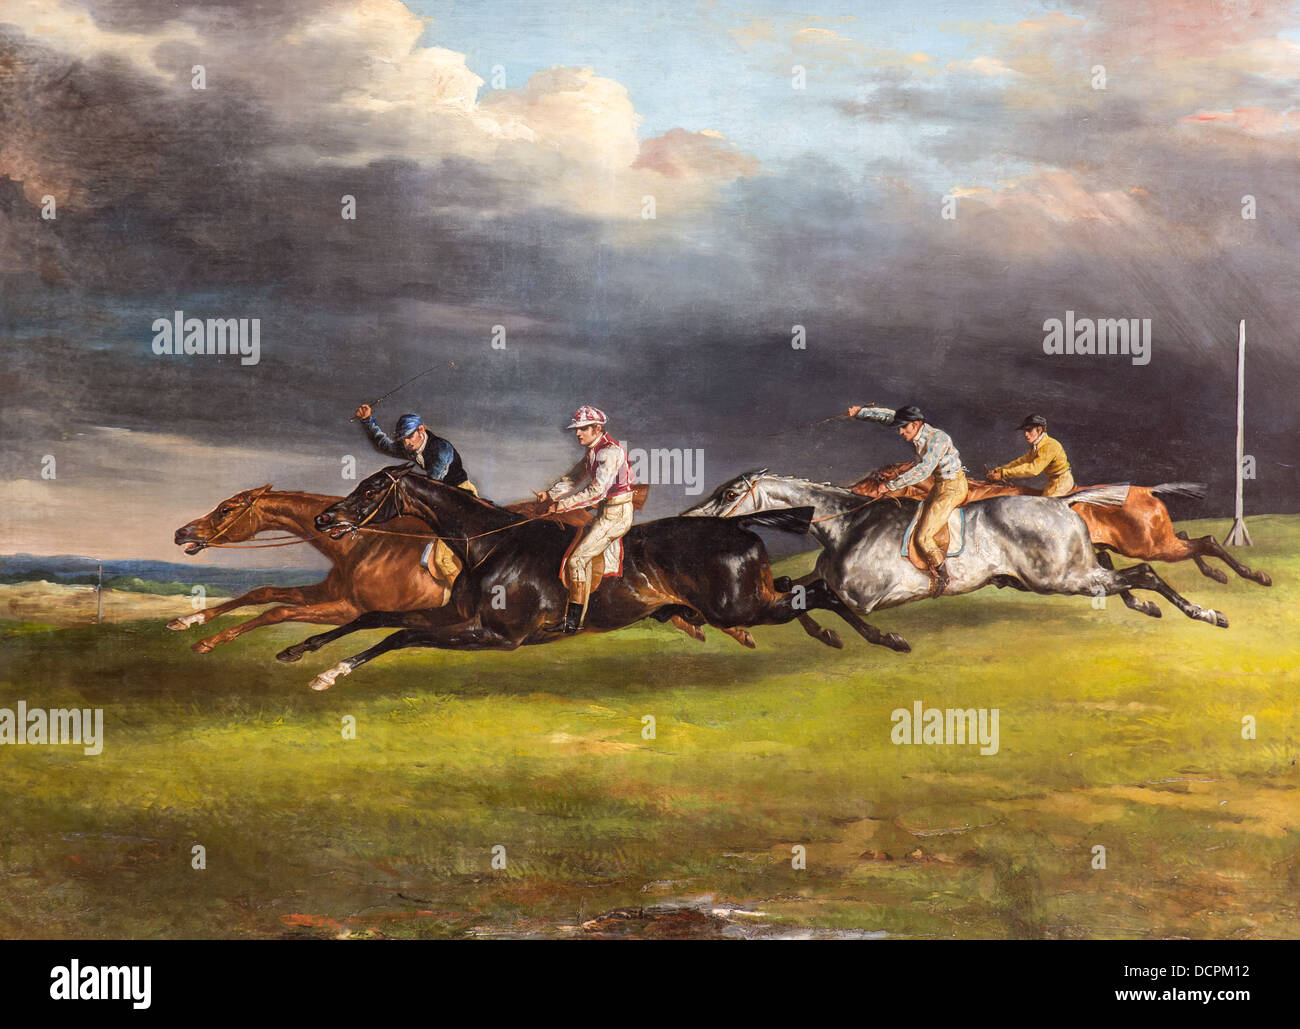 19th century - Horse Ride, Derby of 1821 in Epsom, Théodore Géricault Philippe Sauvan-Magnet / Active Museum Stock Photo - Alamy